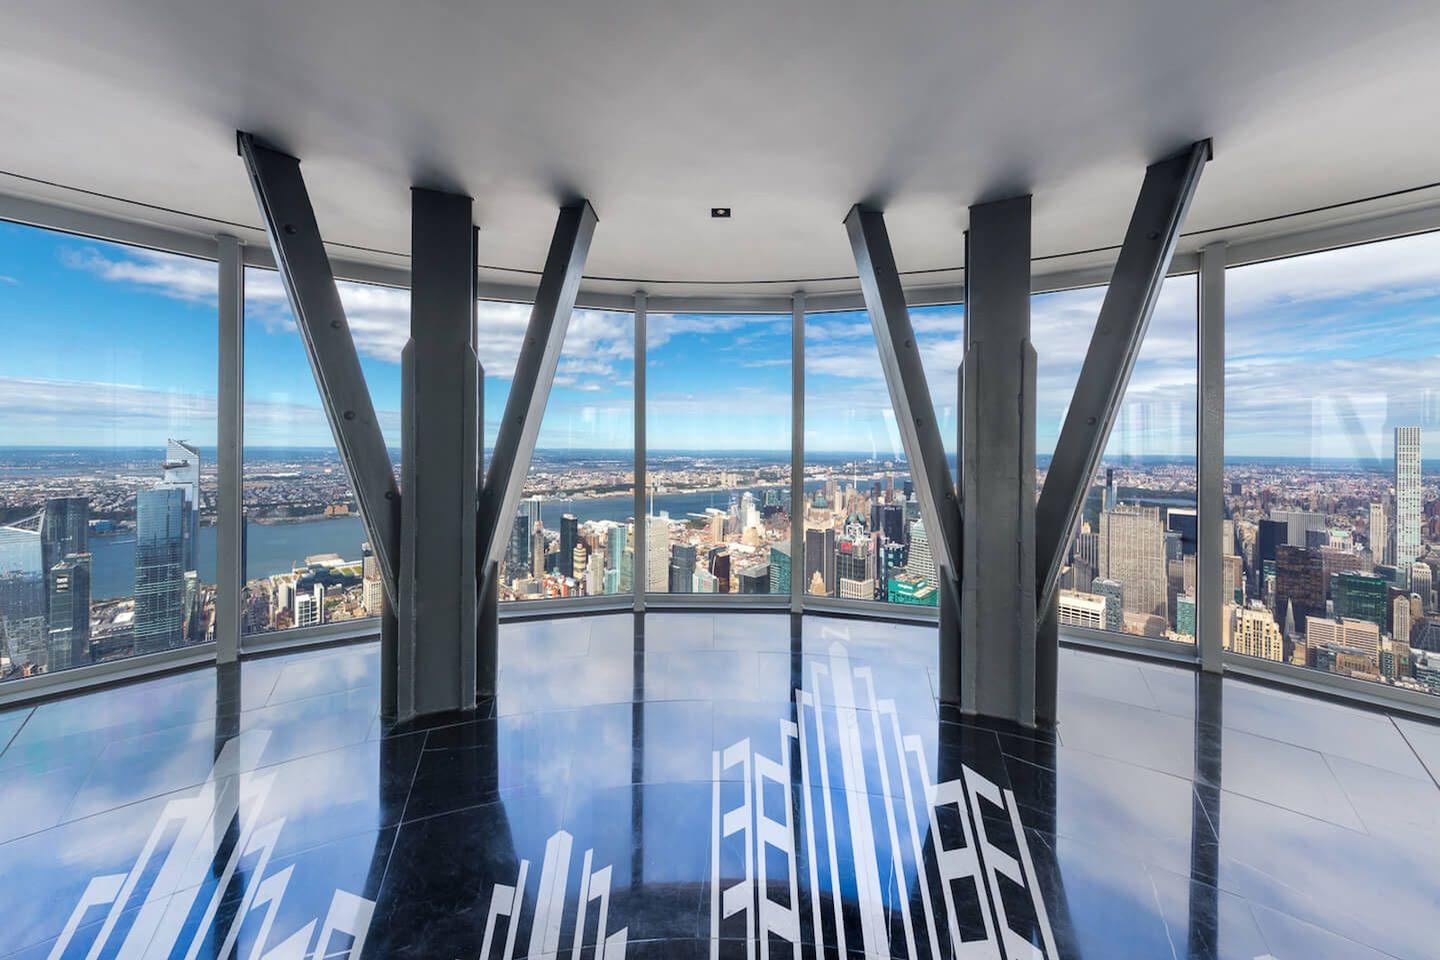 The observation deck has 24 floor-to-ceiling windows each 8ft (2.4m)-tall